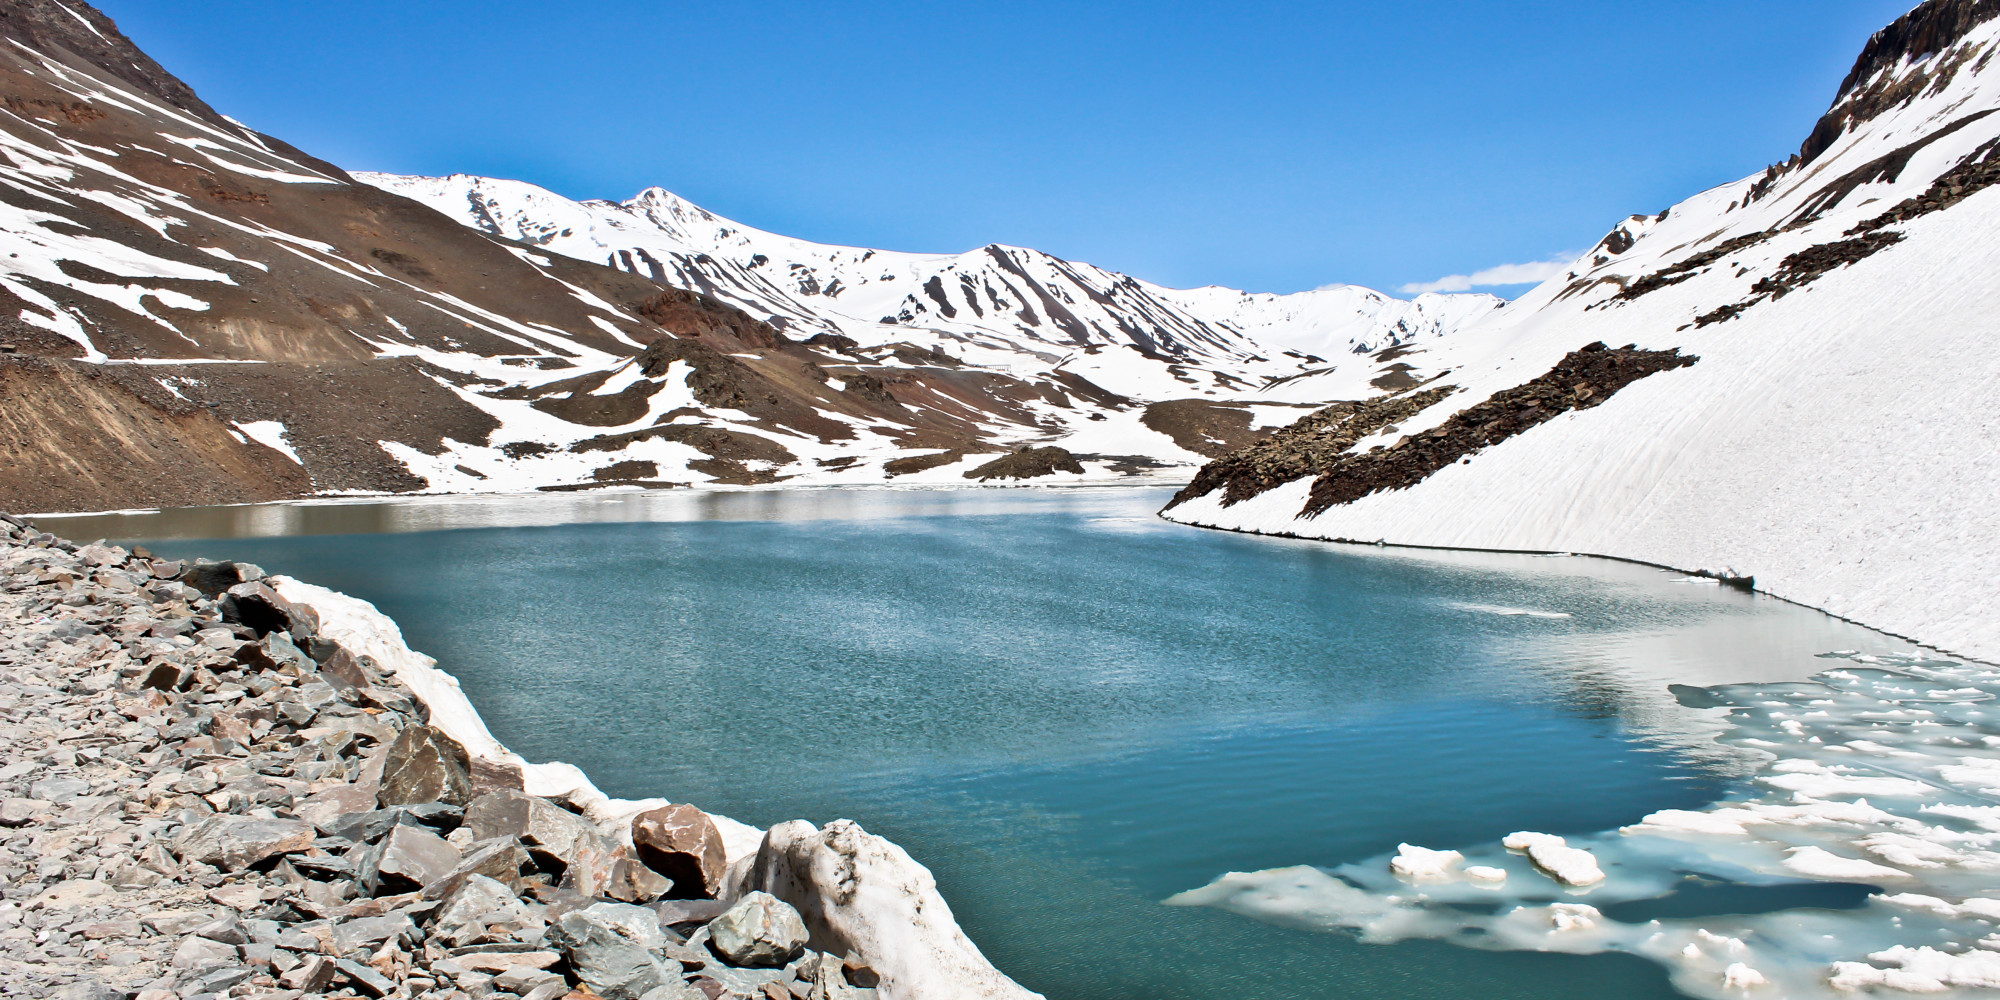 Rohtang - Best tourist place to visit in Manali